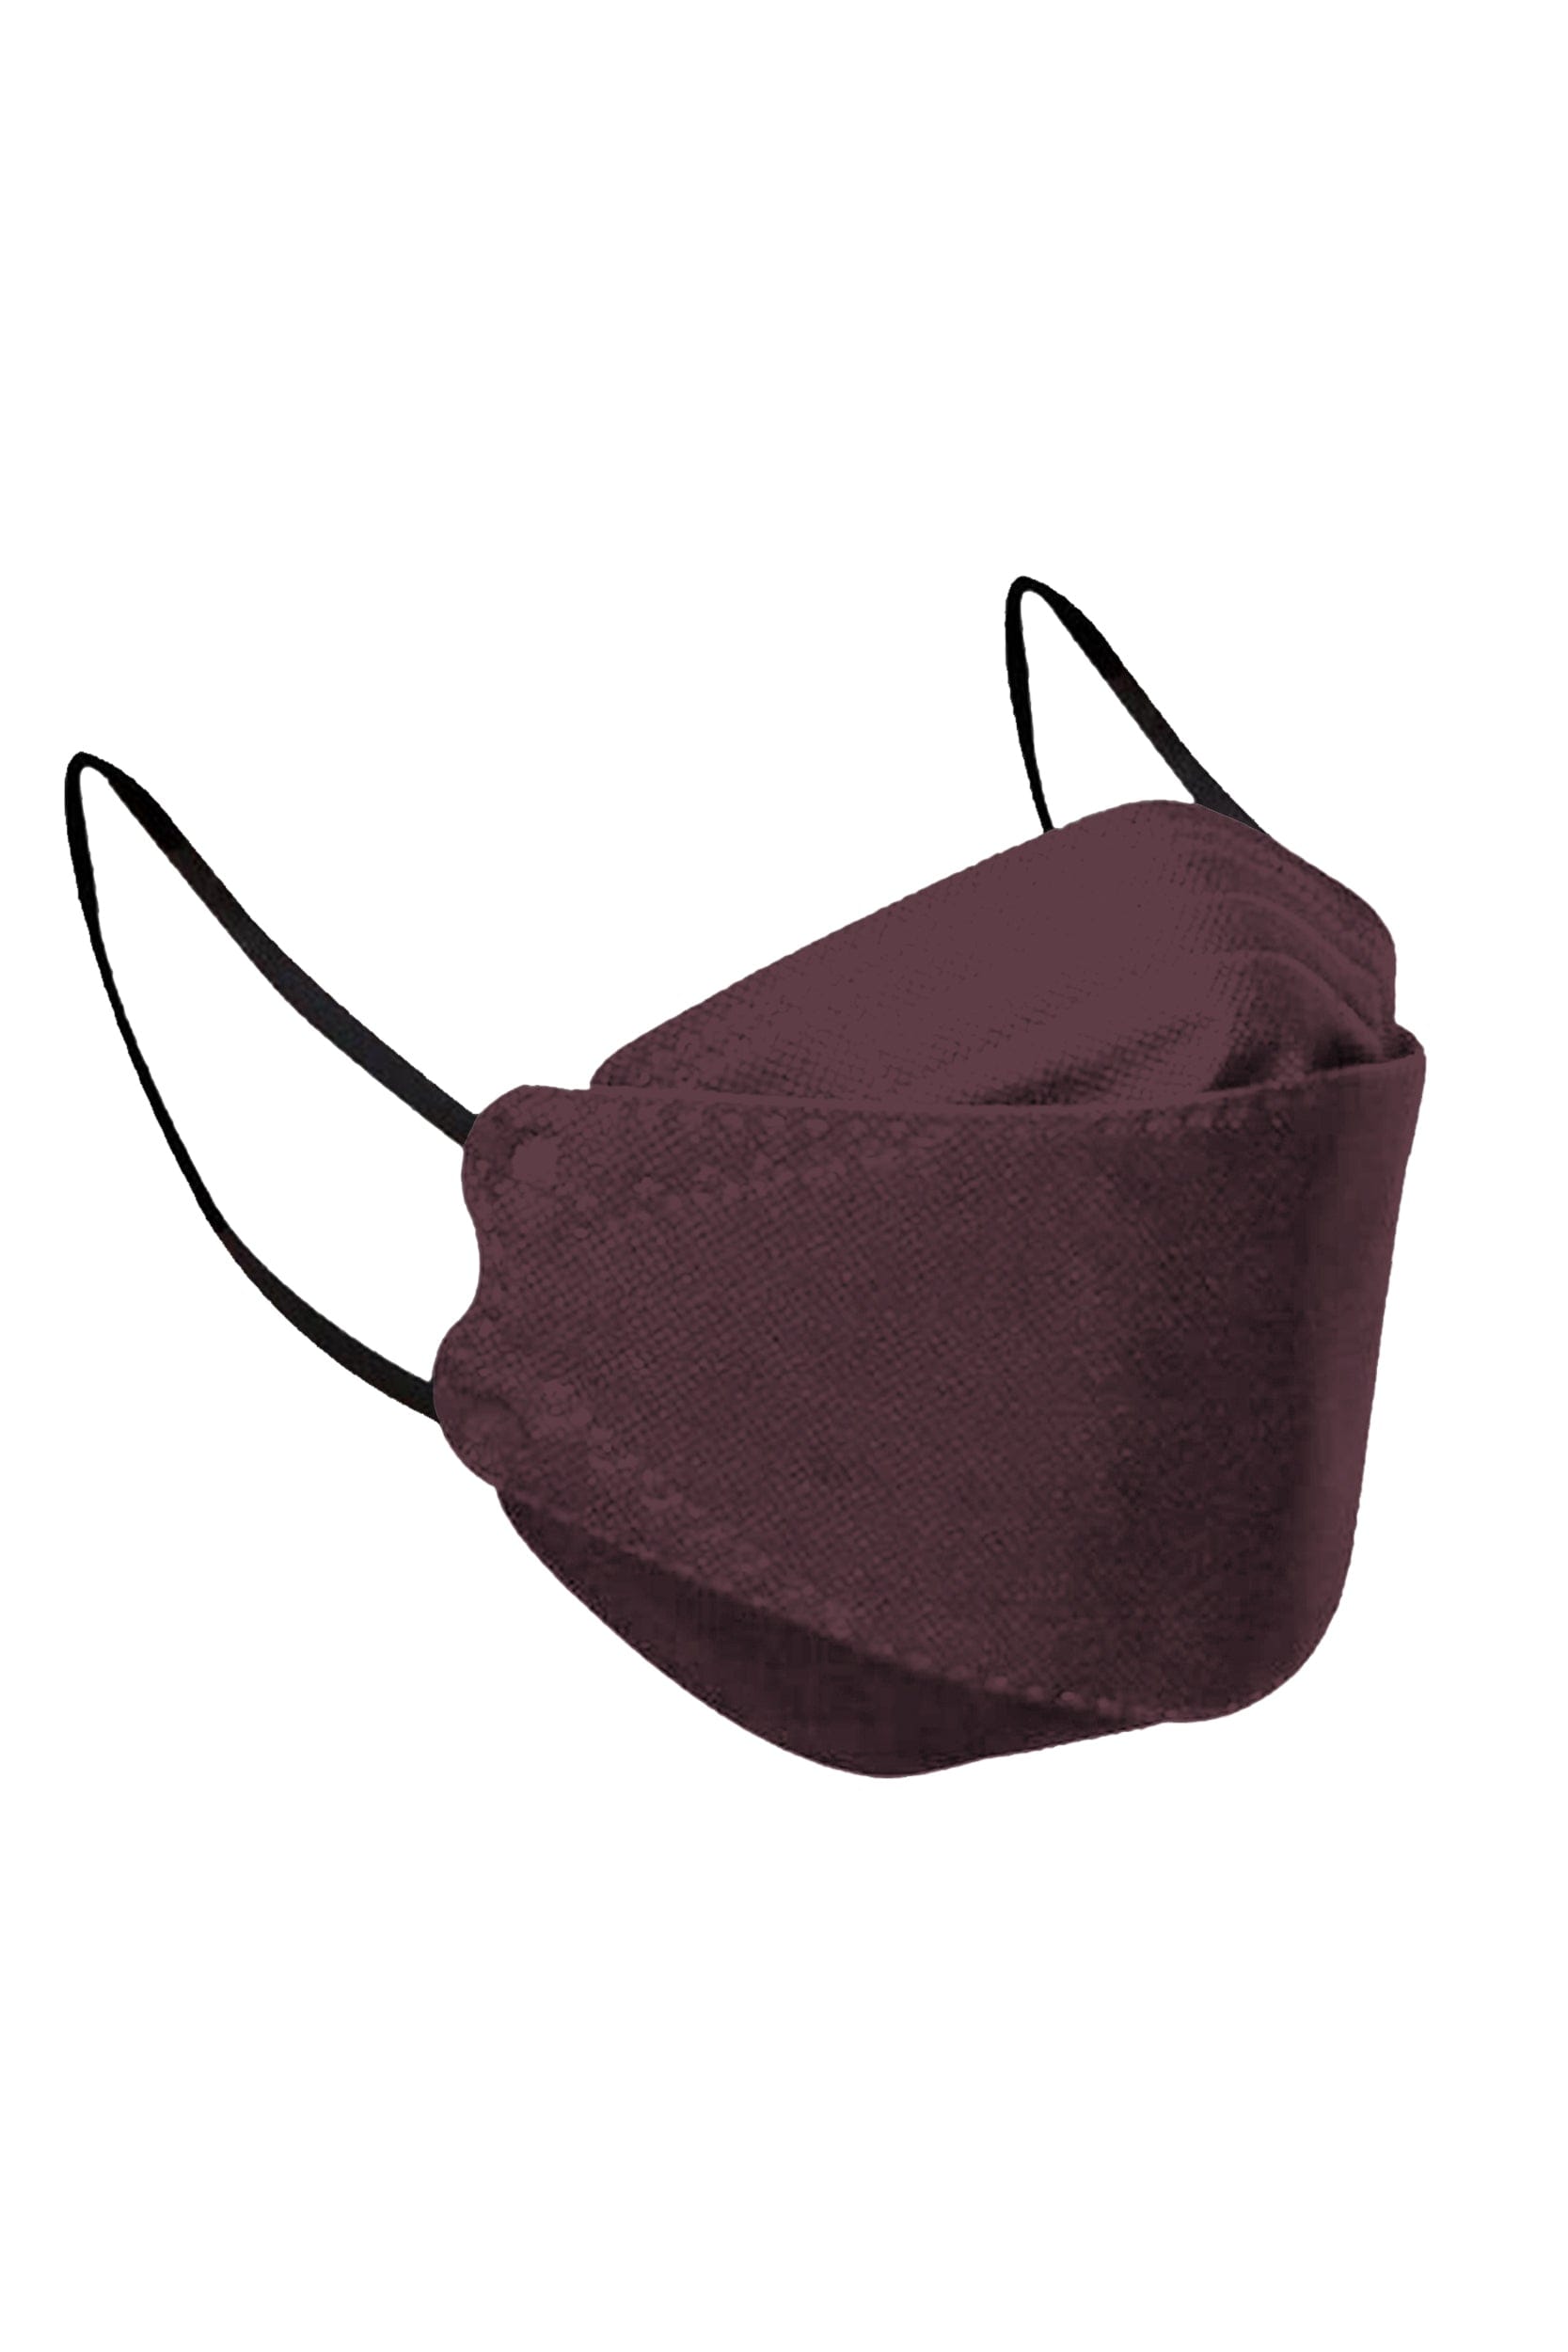 Stylish dark red KF94 face mask, with soft black ear loops and high quality fabric. 